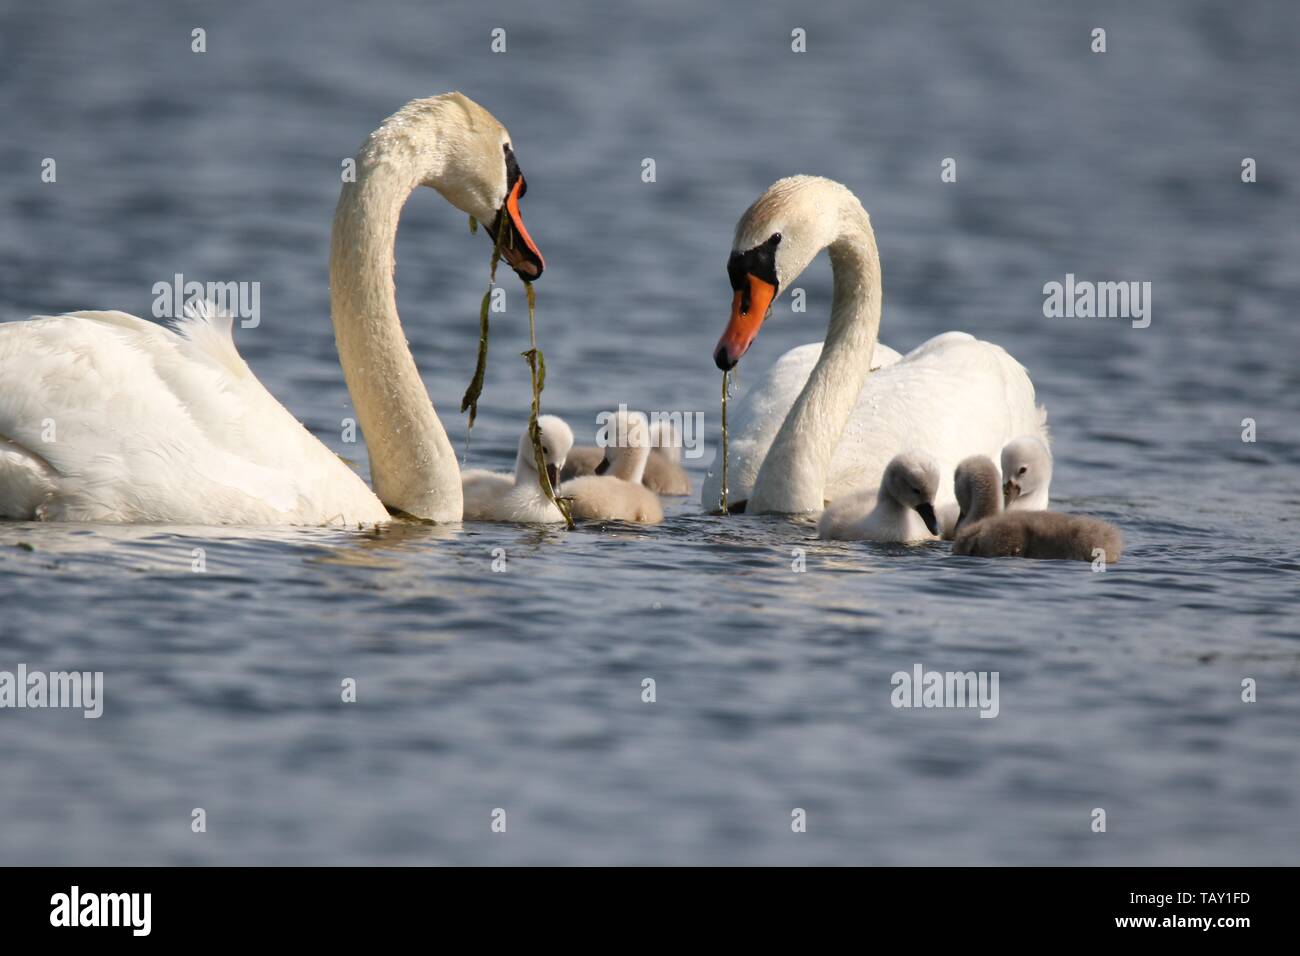 A pair of mute swans Cygnus olor with cygnets swimming on a blue lake in Spring the parent swans are feeding the cygnets Stock Photo